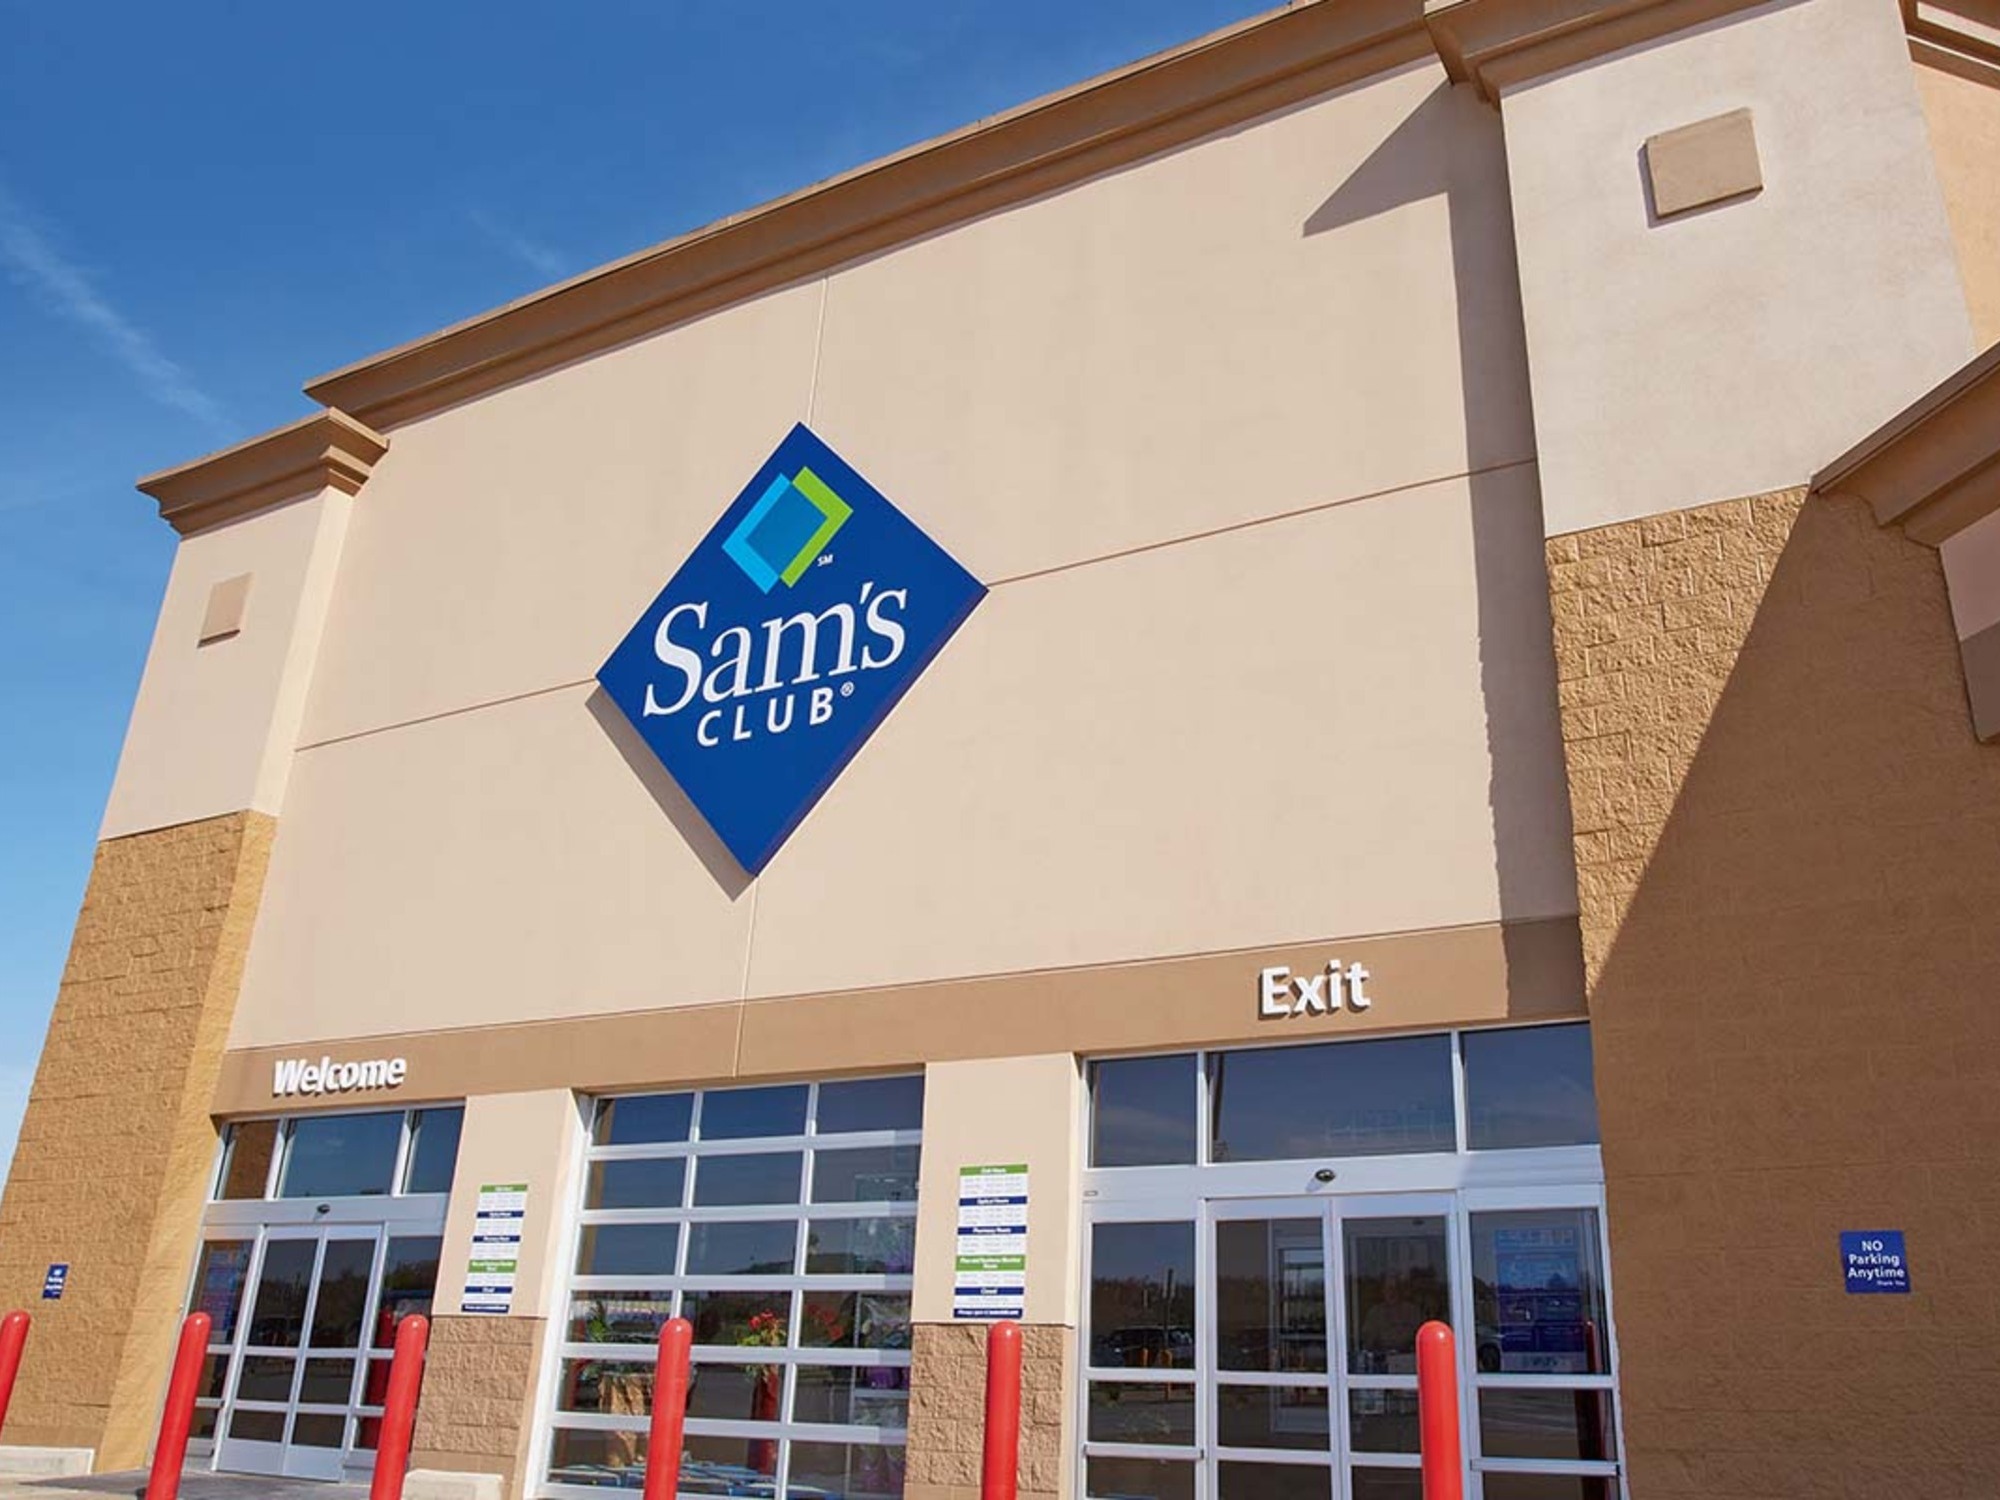 Now’s the only time you can get a Sam’s Club membership and $10 gift card for $15